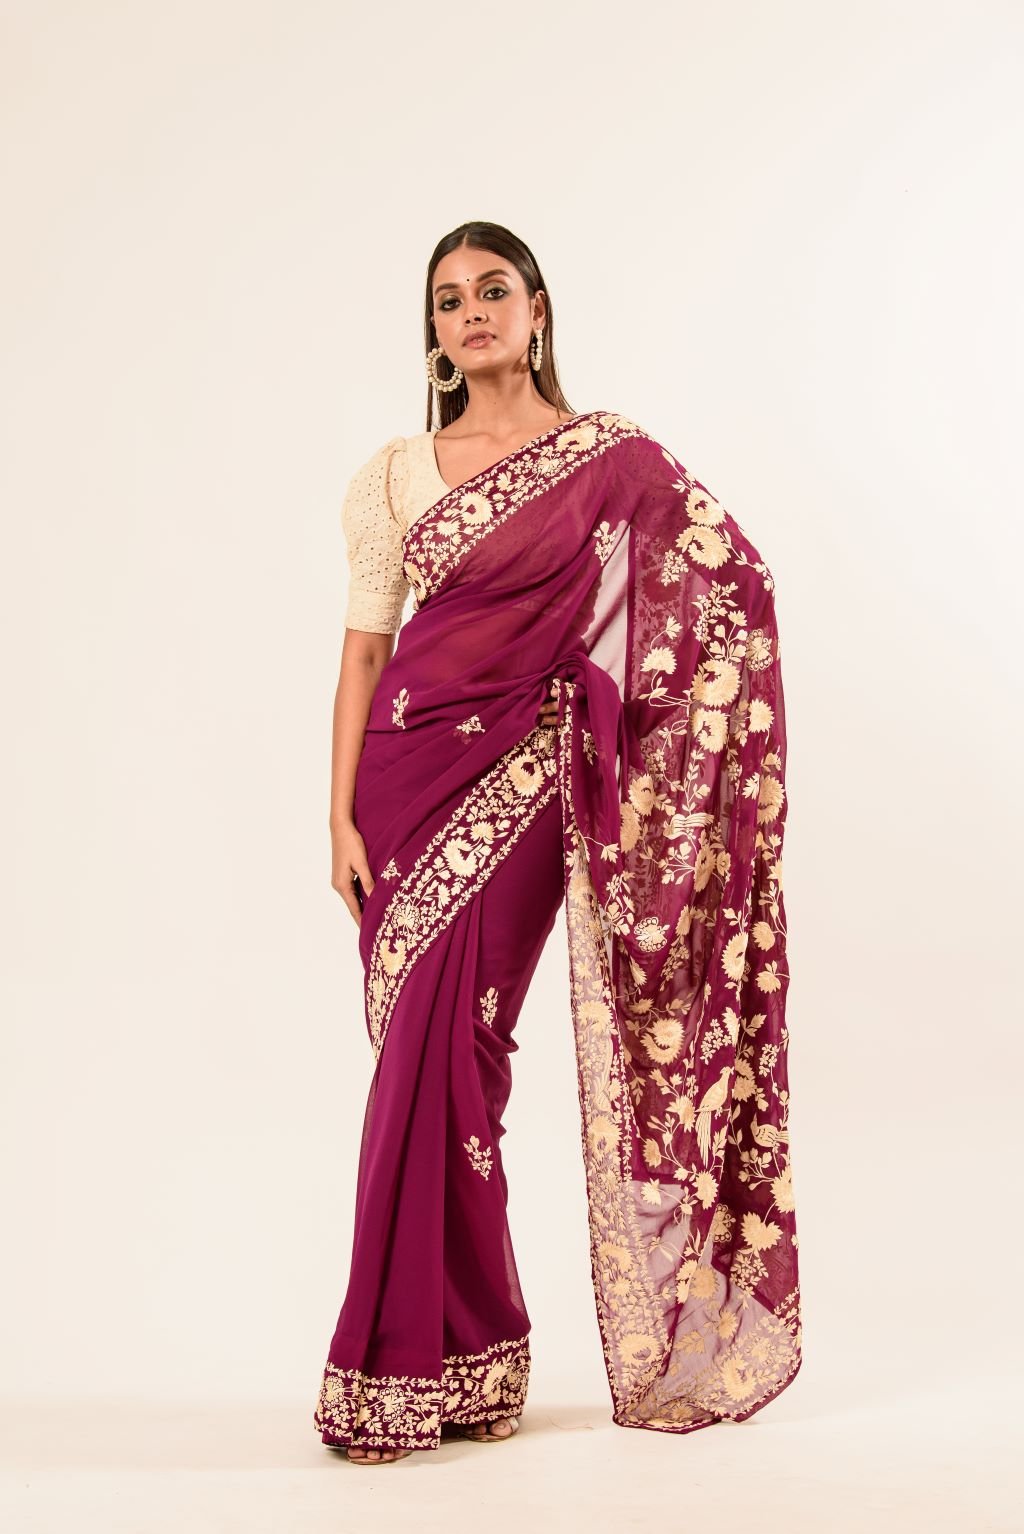 Maroon Parsi Gara Saree in Georgette with an Embellished Hand Embroidered Work - Anvi Couture